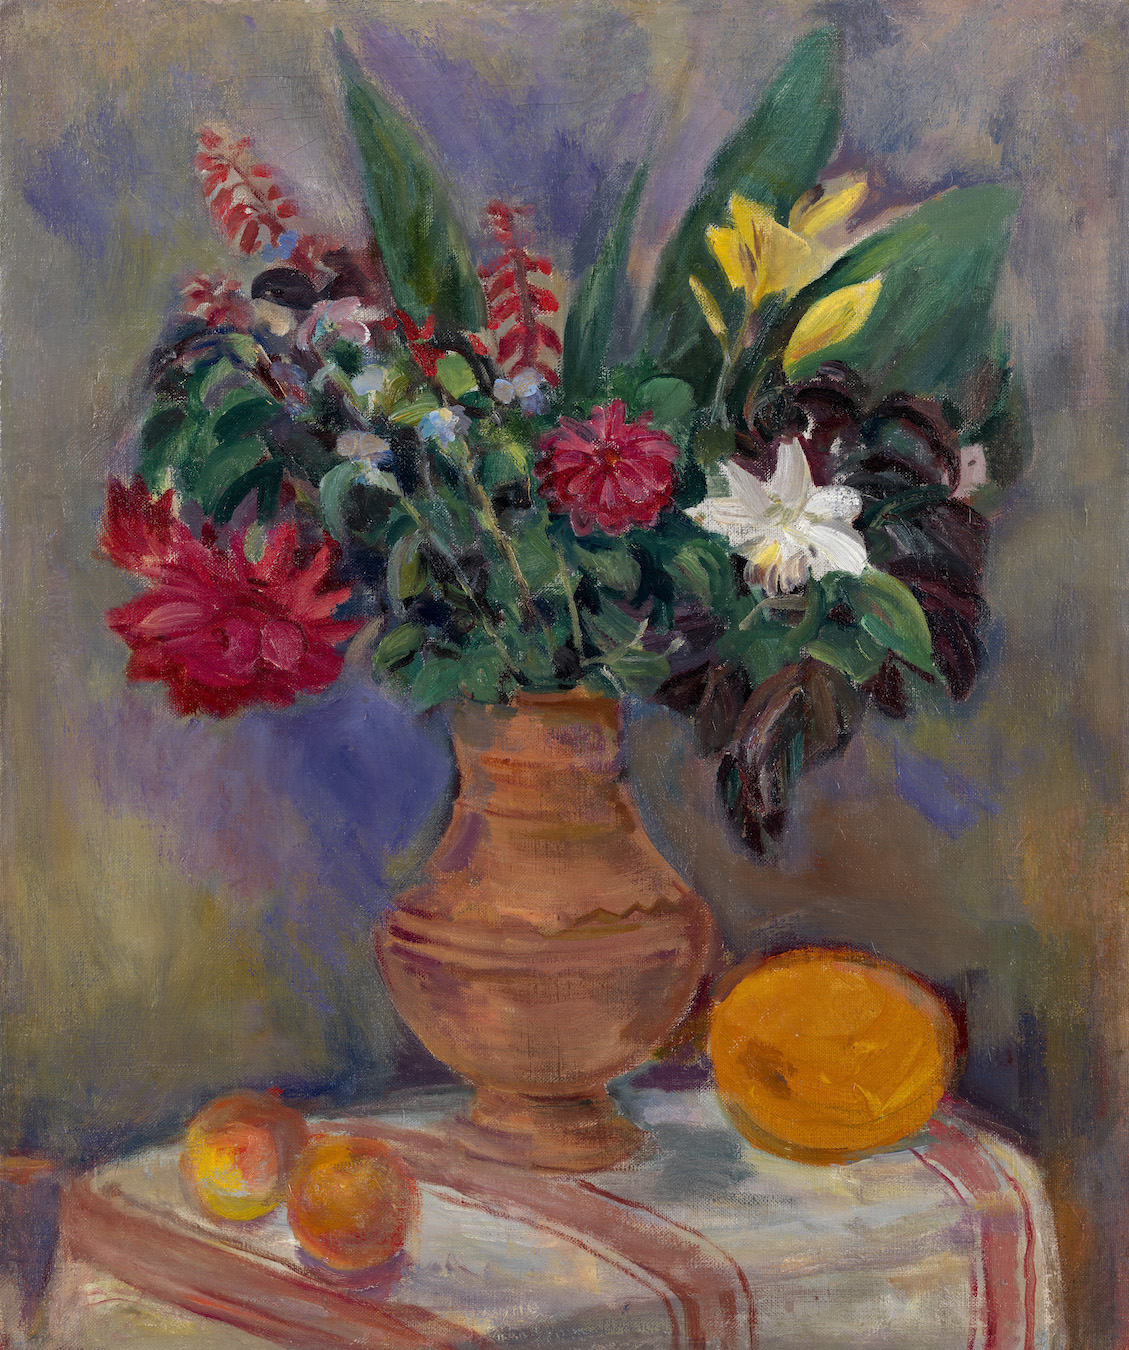 * KUZNETSOV, PAVEL (1878-1968) Still Life with Flowers in a Clay Pot Oil on canvas, 65.5 by 54.5 cm.